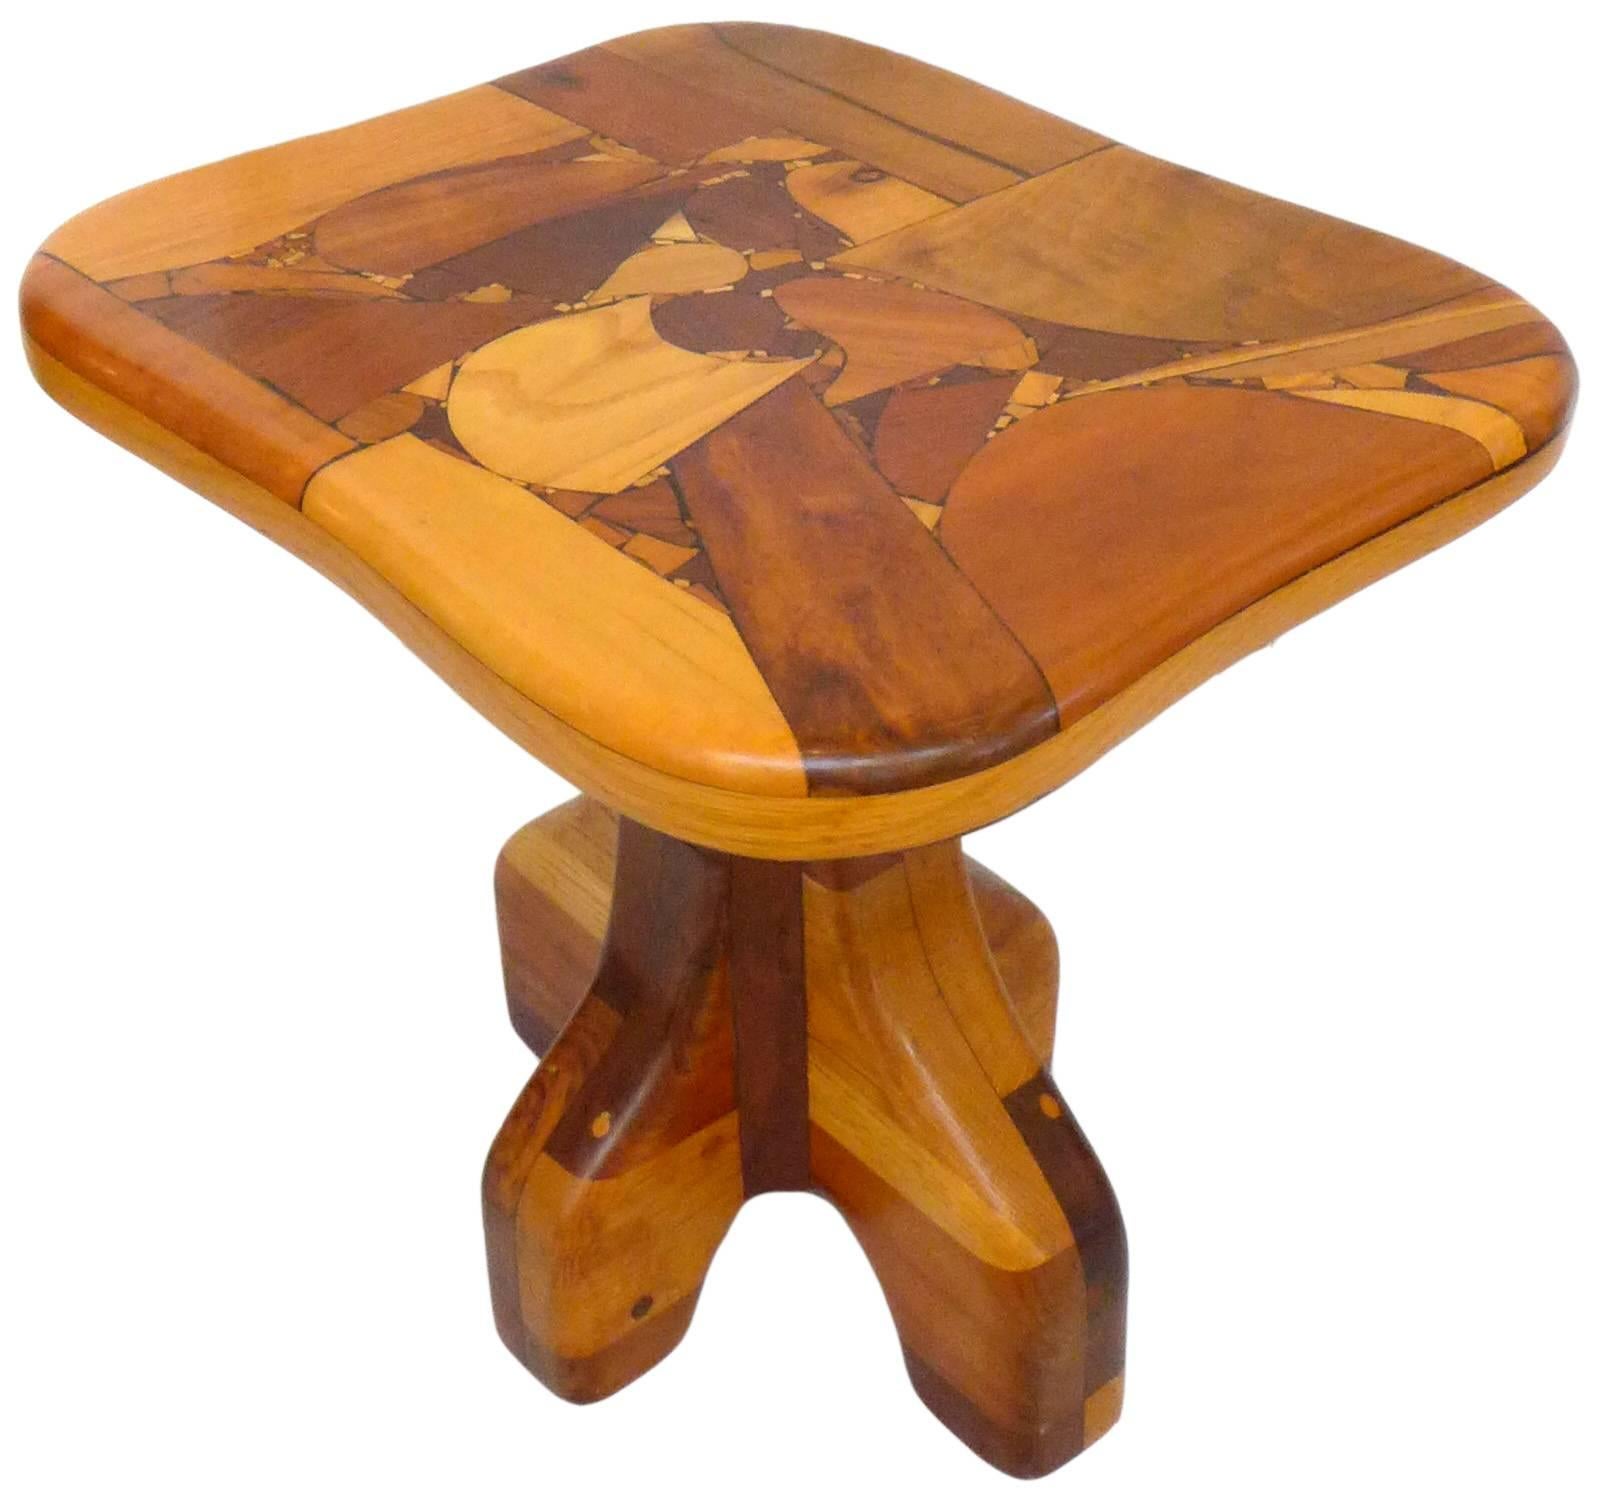 An extraordinary pair of handcrafted, wood marquetry side tables. Beautifully, thoroughly constructed of eye-catching, contrasting woods throughout; fantastic, abstract marquetry table tops with subtly curving edges sit atop four-footed pedestal